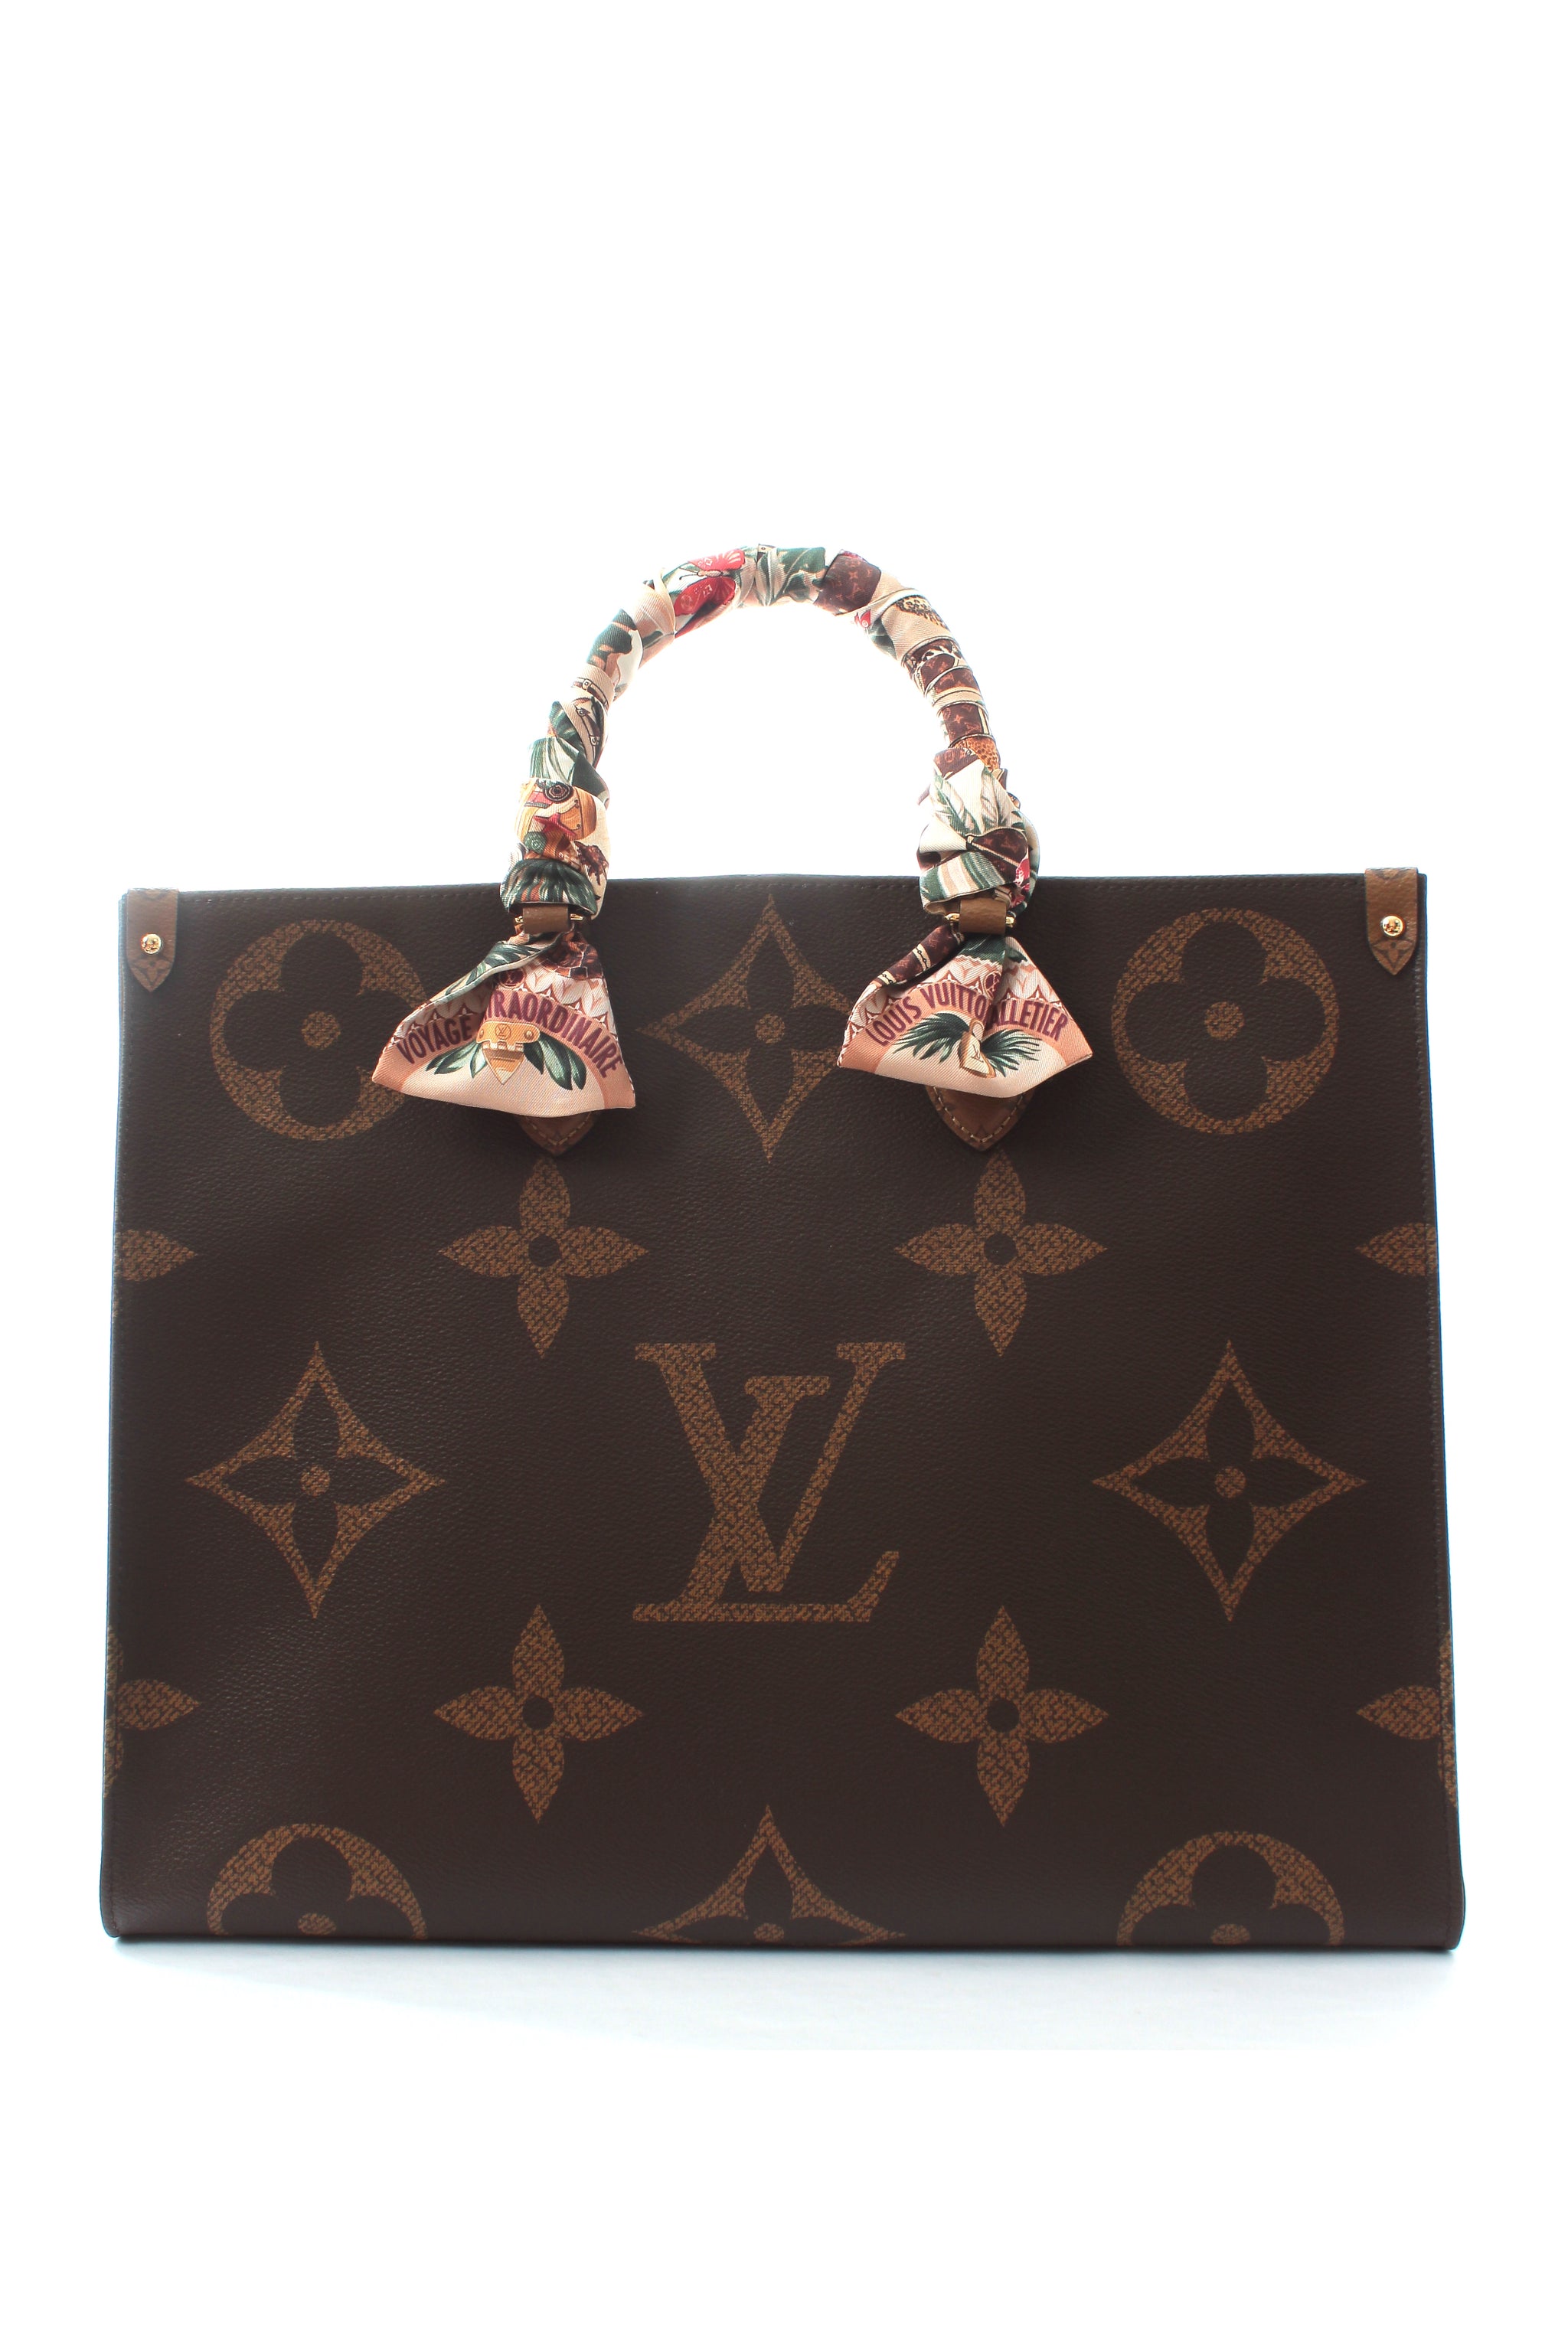 Shop the Latest Louis Vuitton Bags for Women in the Philippines